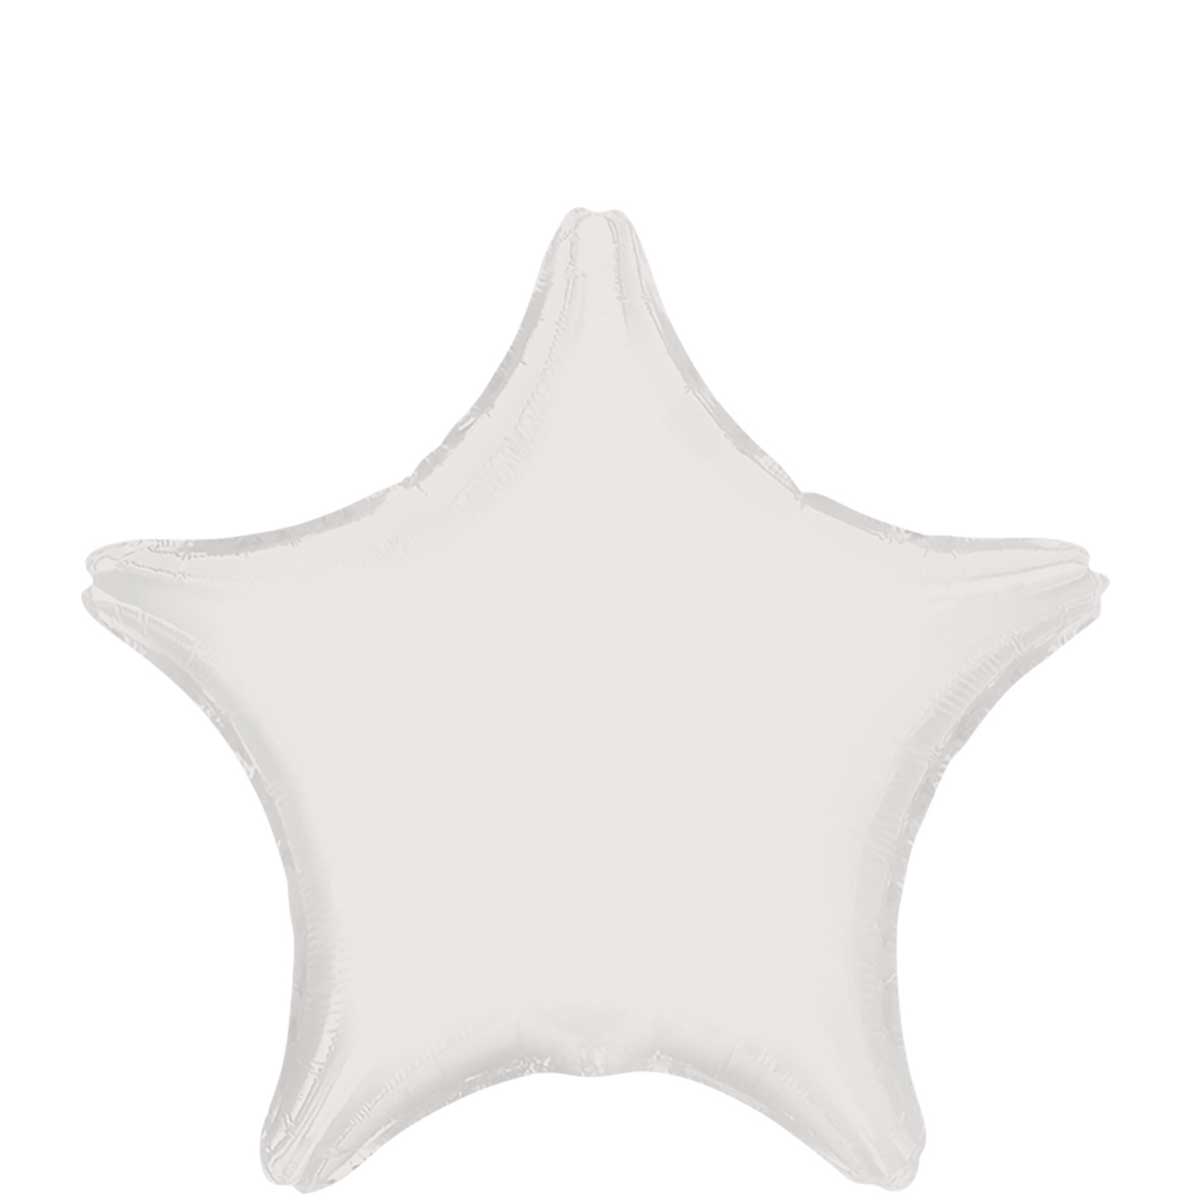 Metallic White Star Foil Balloon 19in Balloons & Streamers - Party Centre - Party Centre